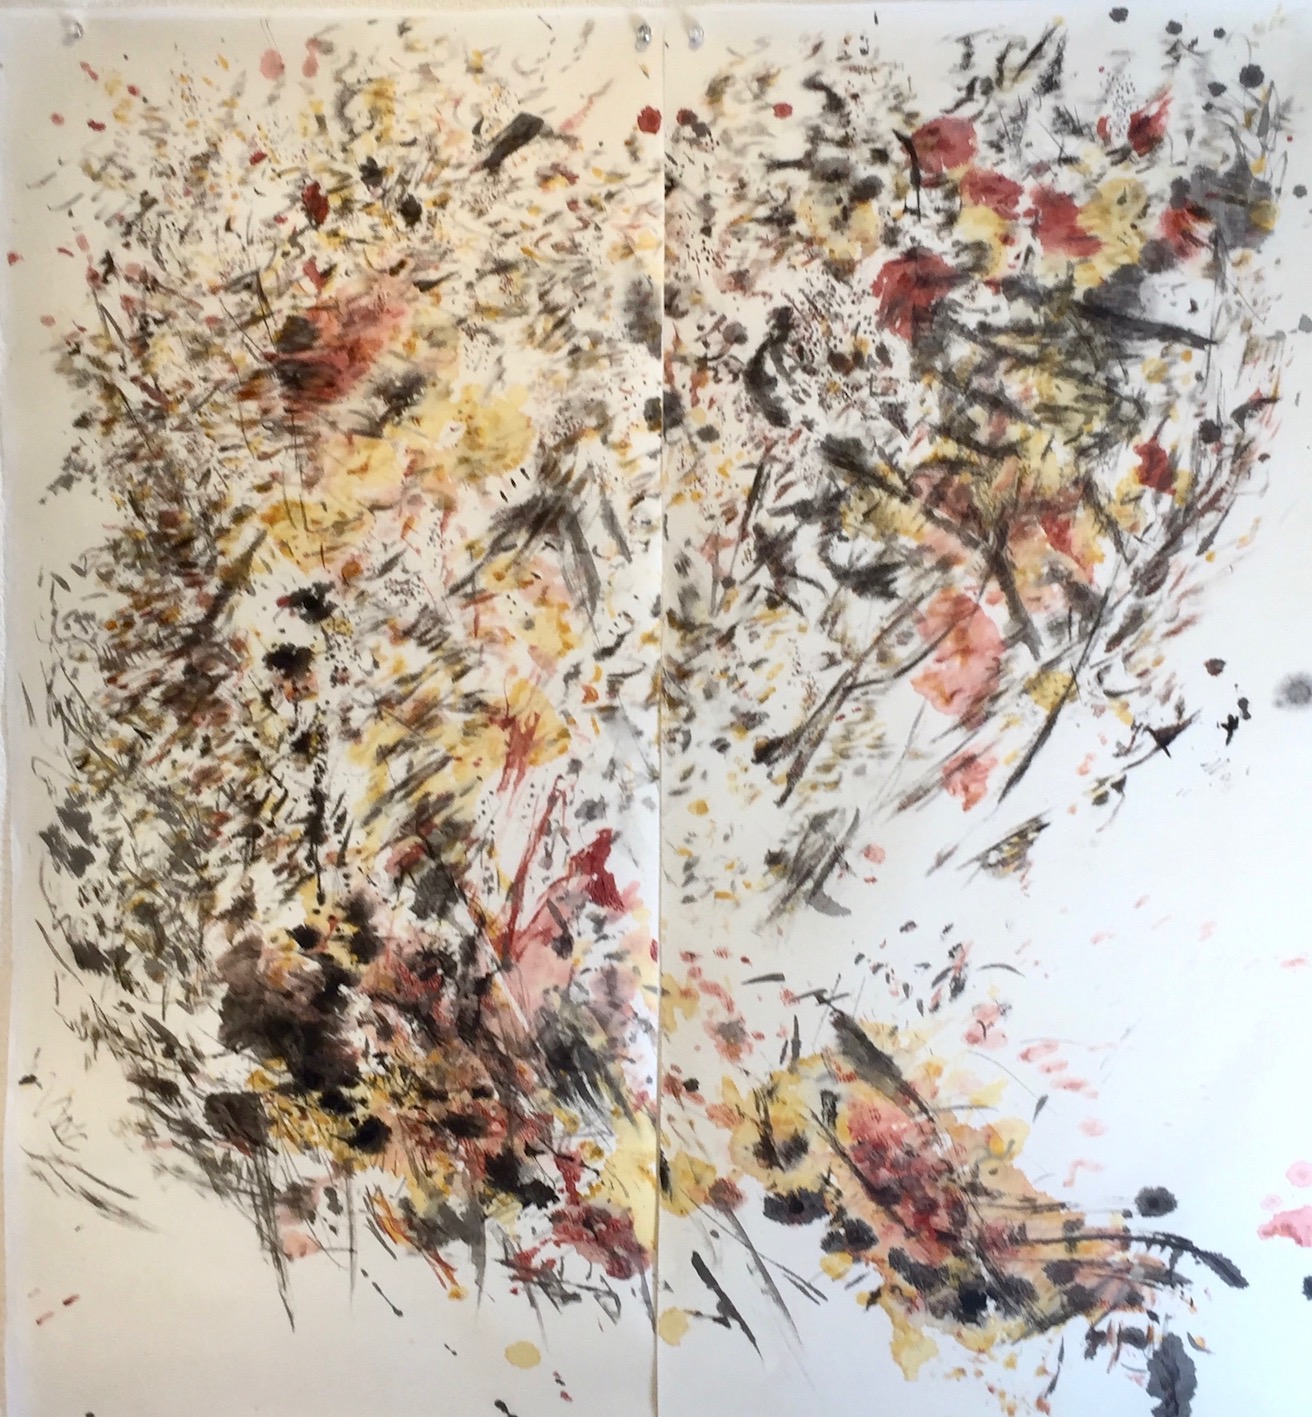 Fire Flying 舞う火108 X 96 cm Sumi ink,water colour, acrylic 墨、水彩絵具、アクリル2019